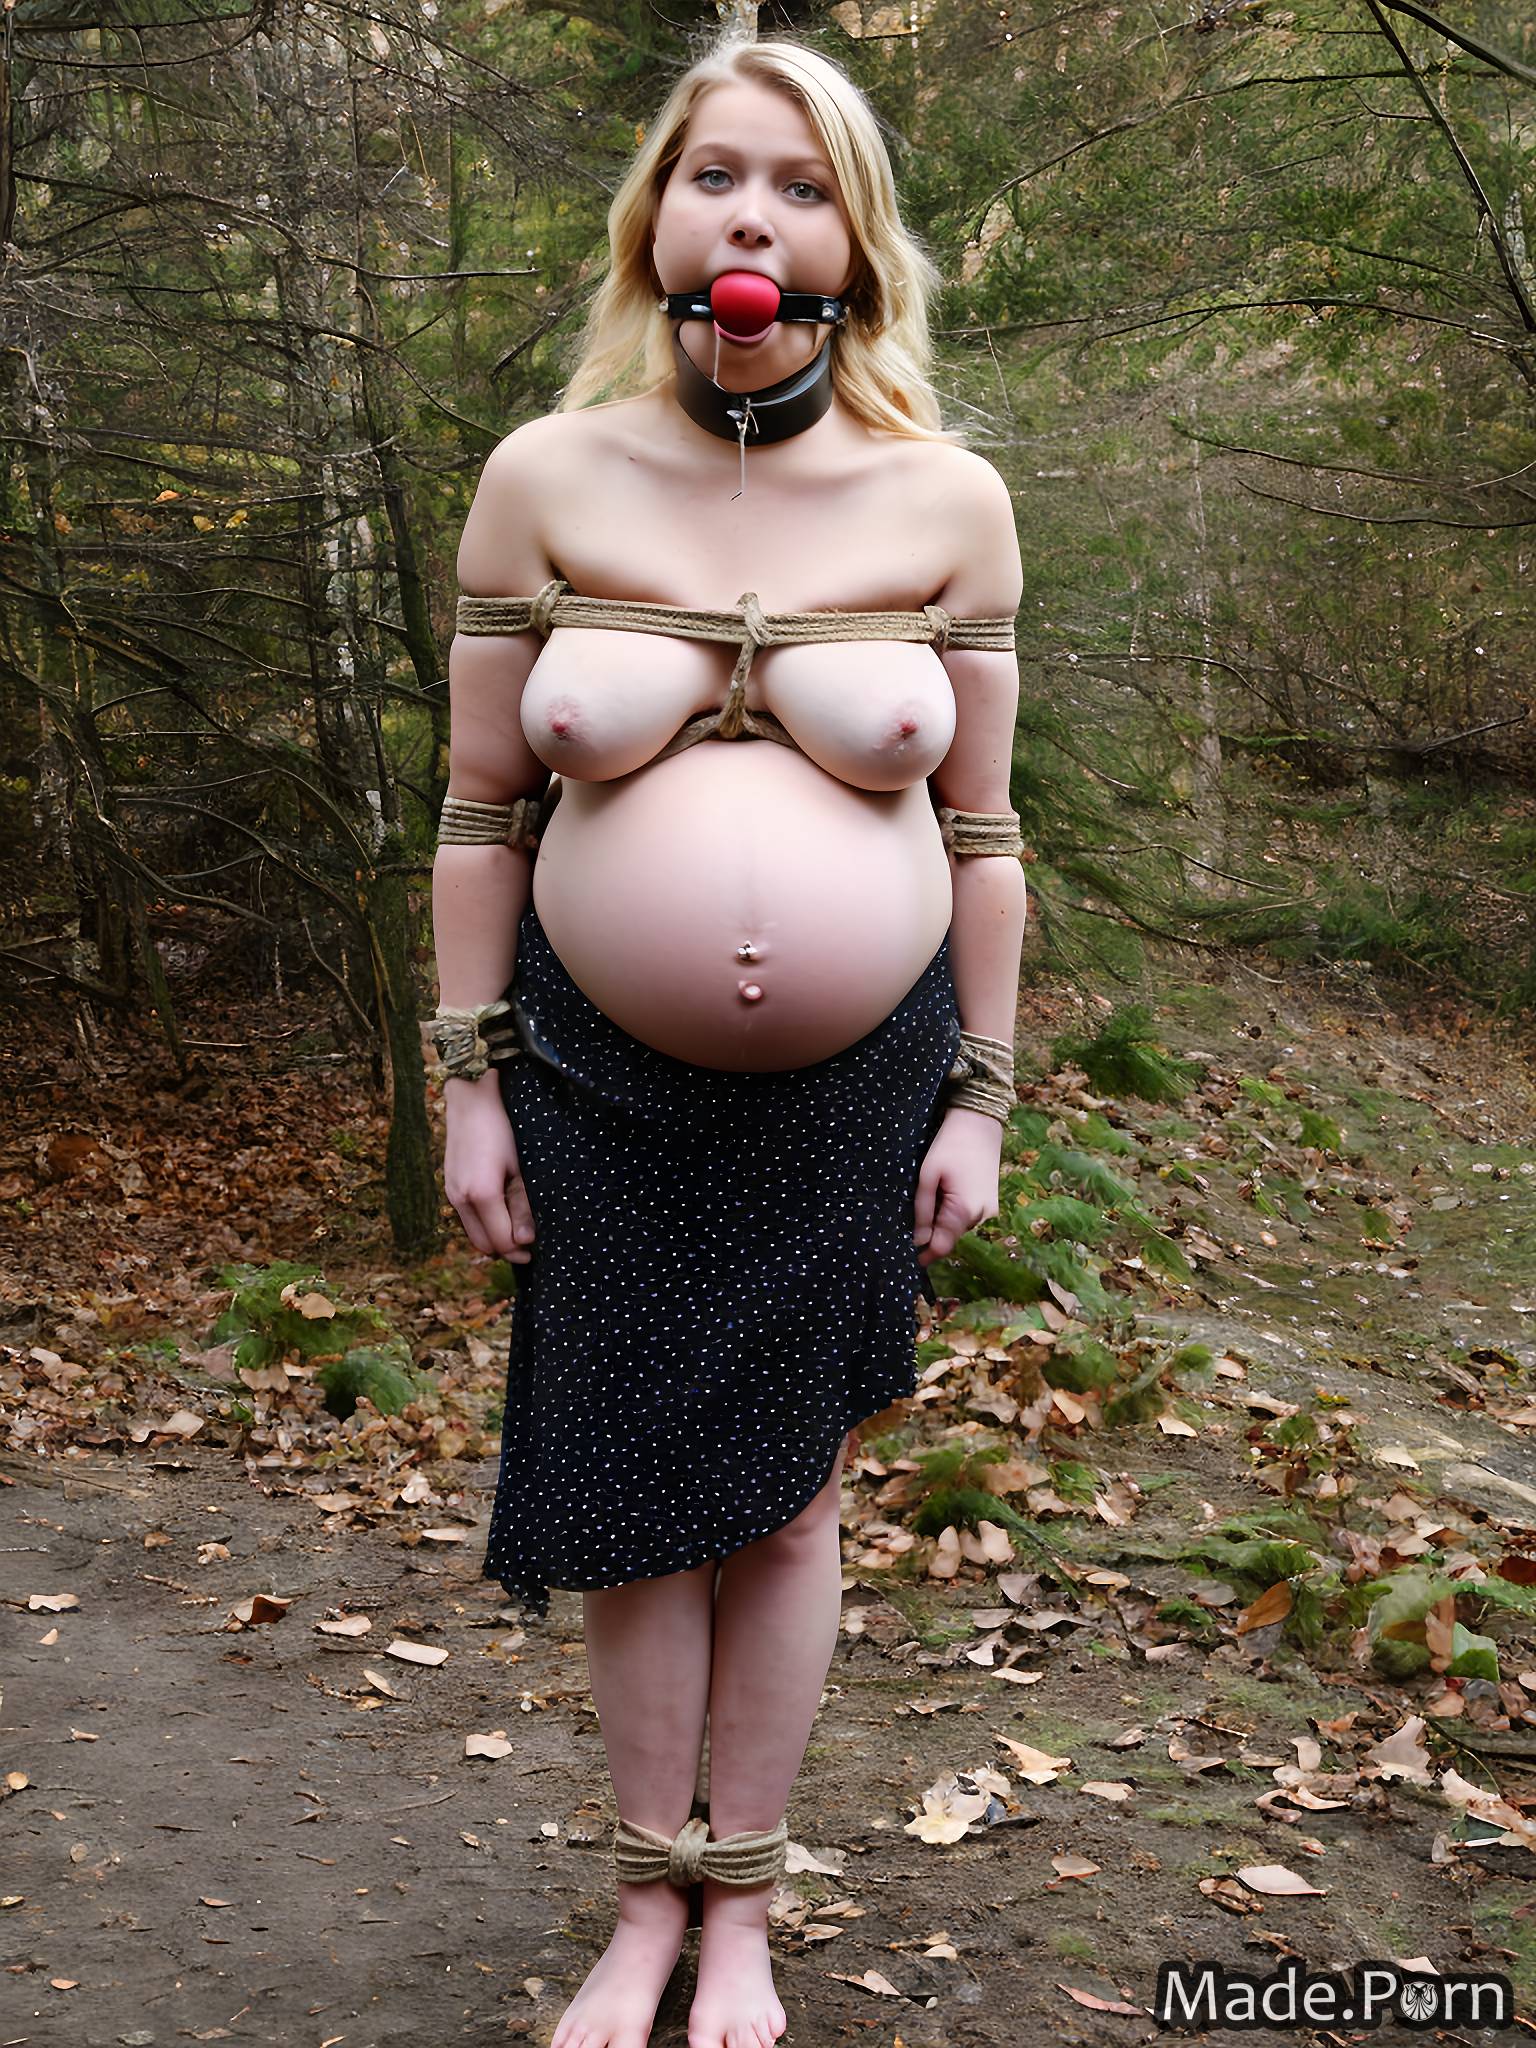 Porn image of ball gag 18 woman perfect boobs blonde pregnant bondage  created by AI